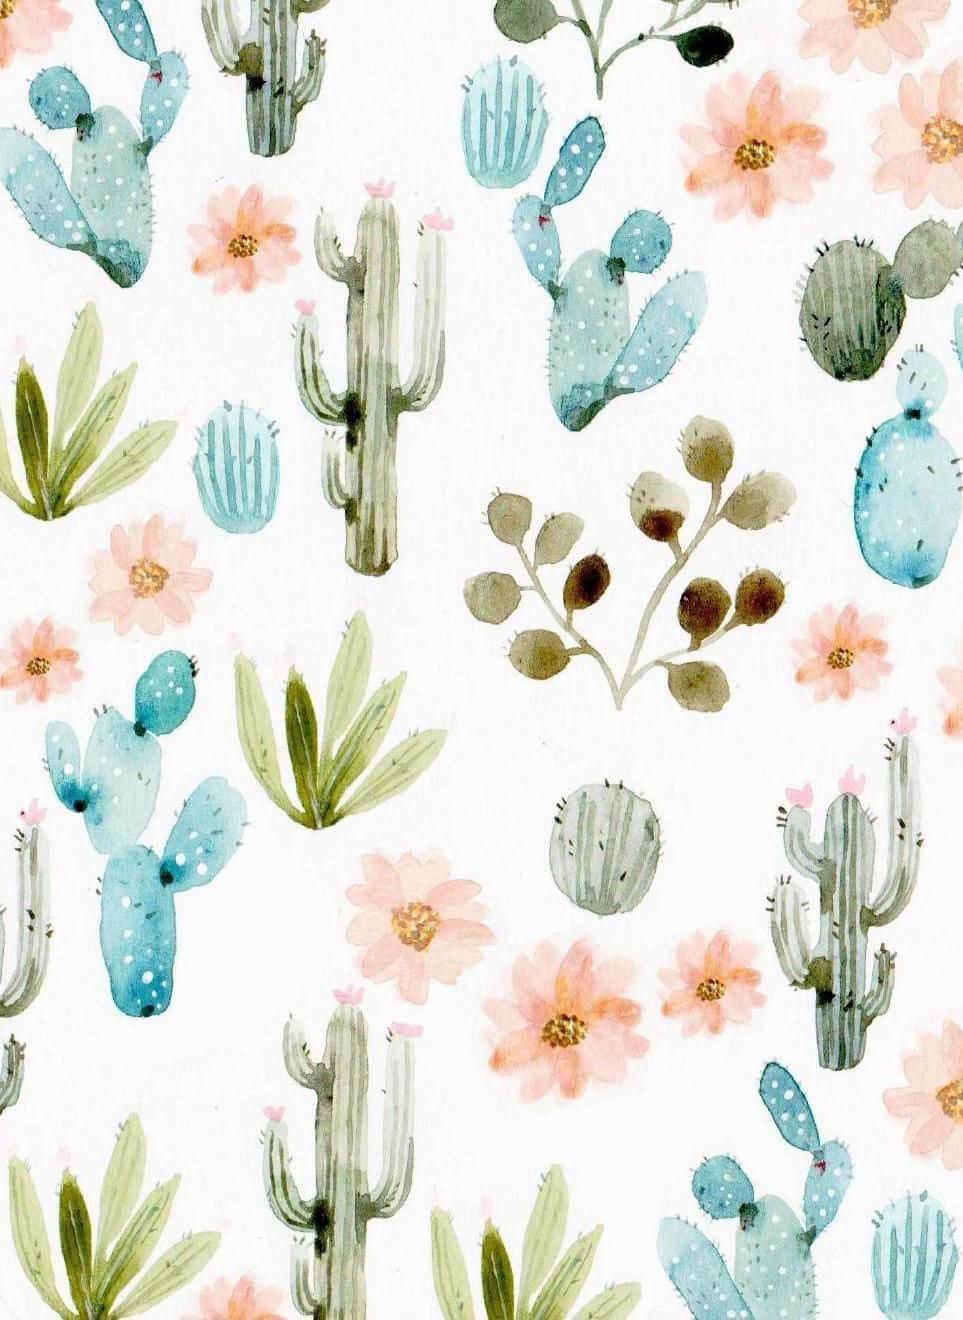 Harness nature's power with this stunning cacti background